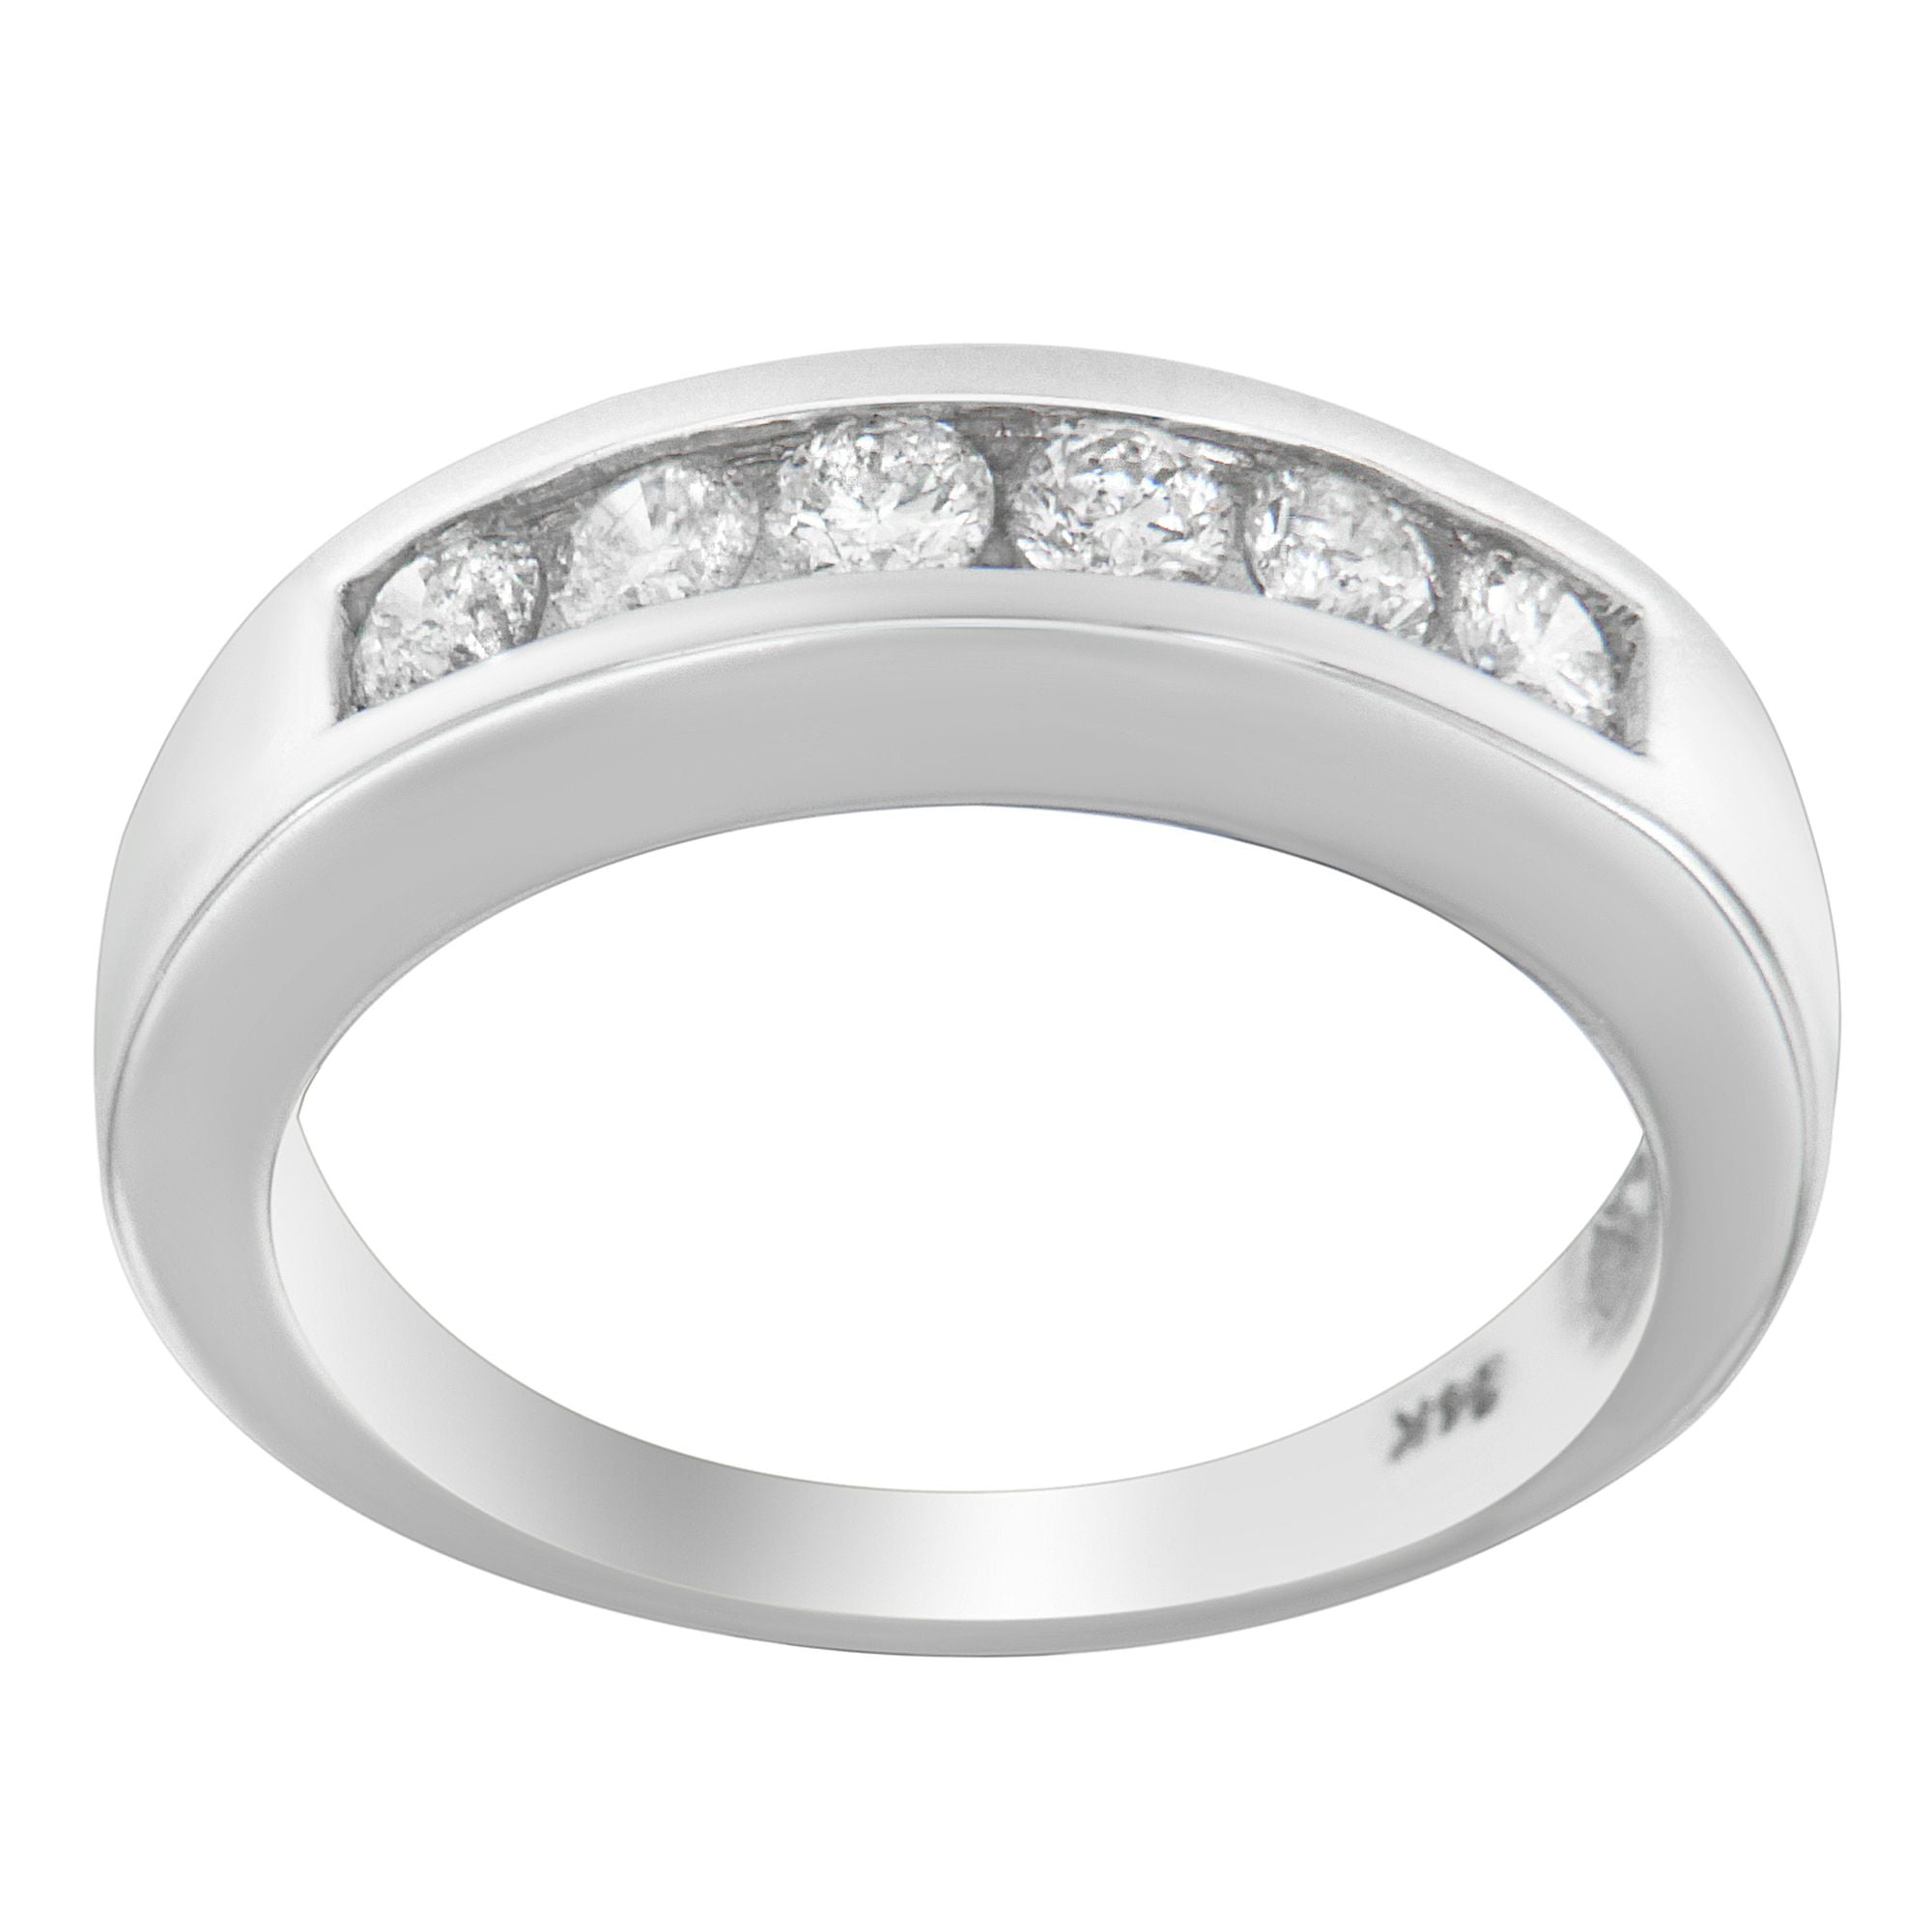 14K White Gold 3/4ct. TDW Diamond Channel Band Ring (H-I, I1-I2) - LinkagejewelrydesignLinkagejewelrydesign